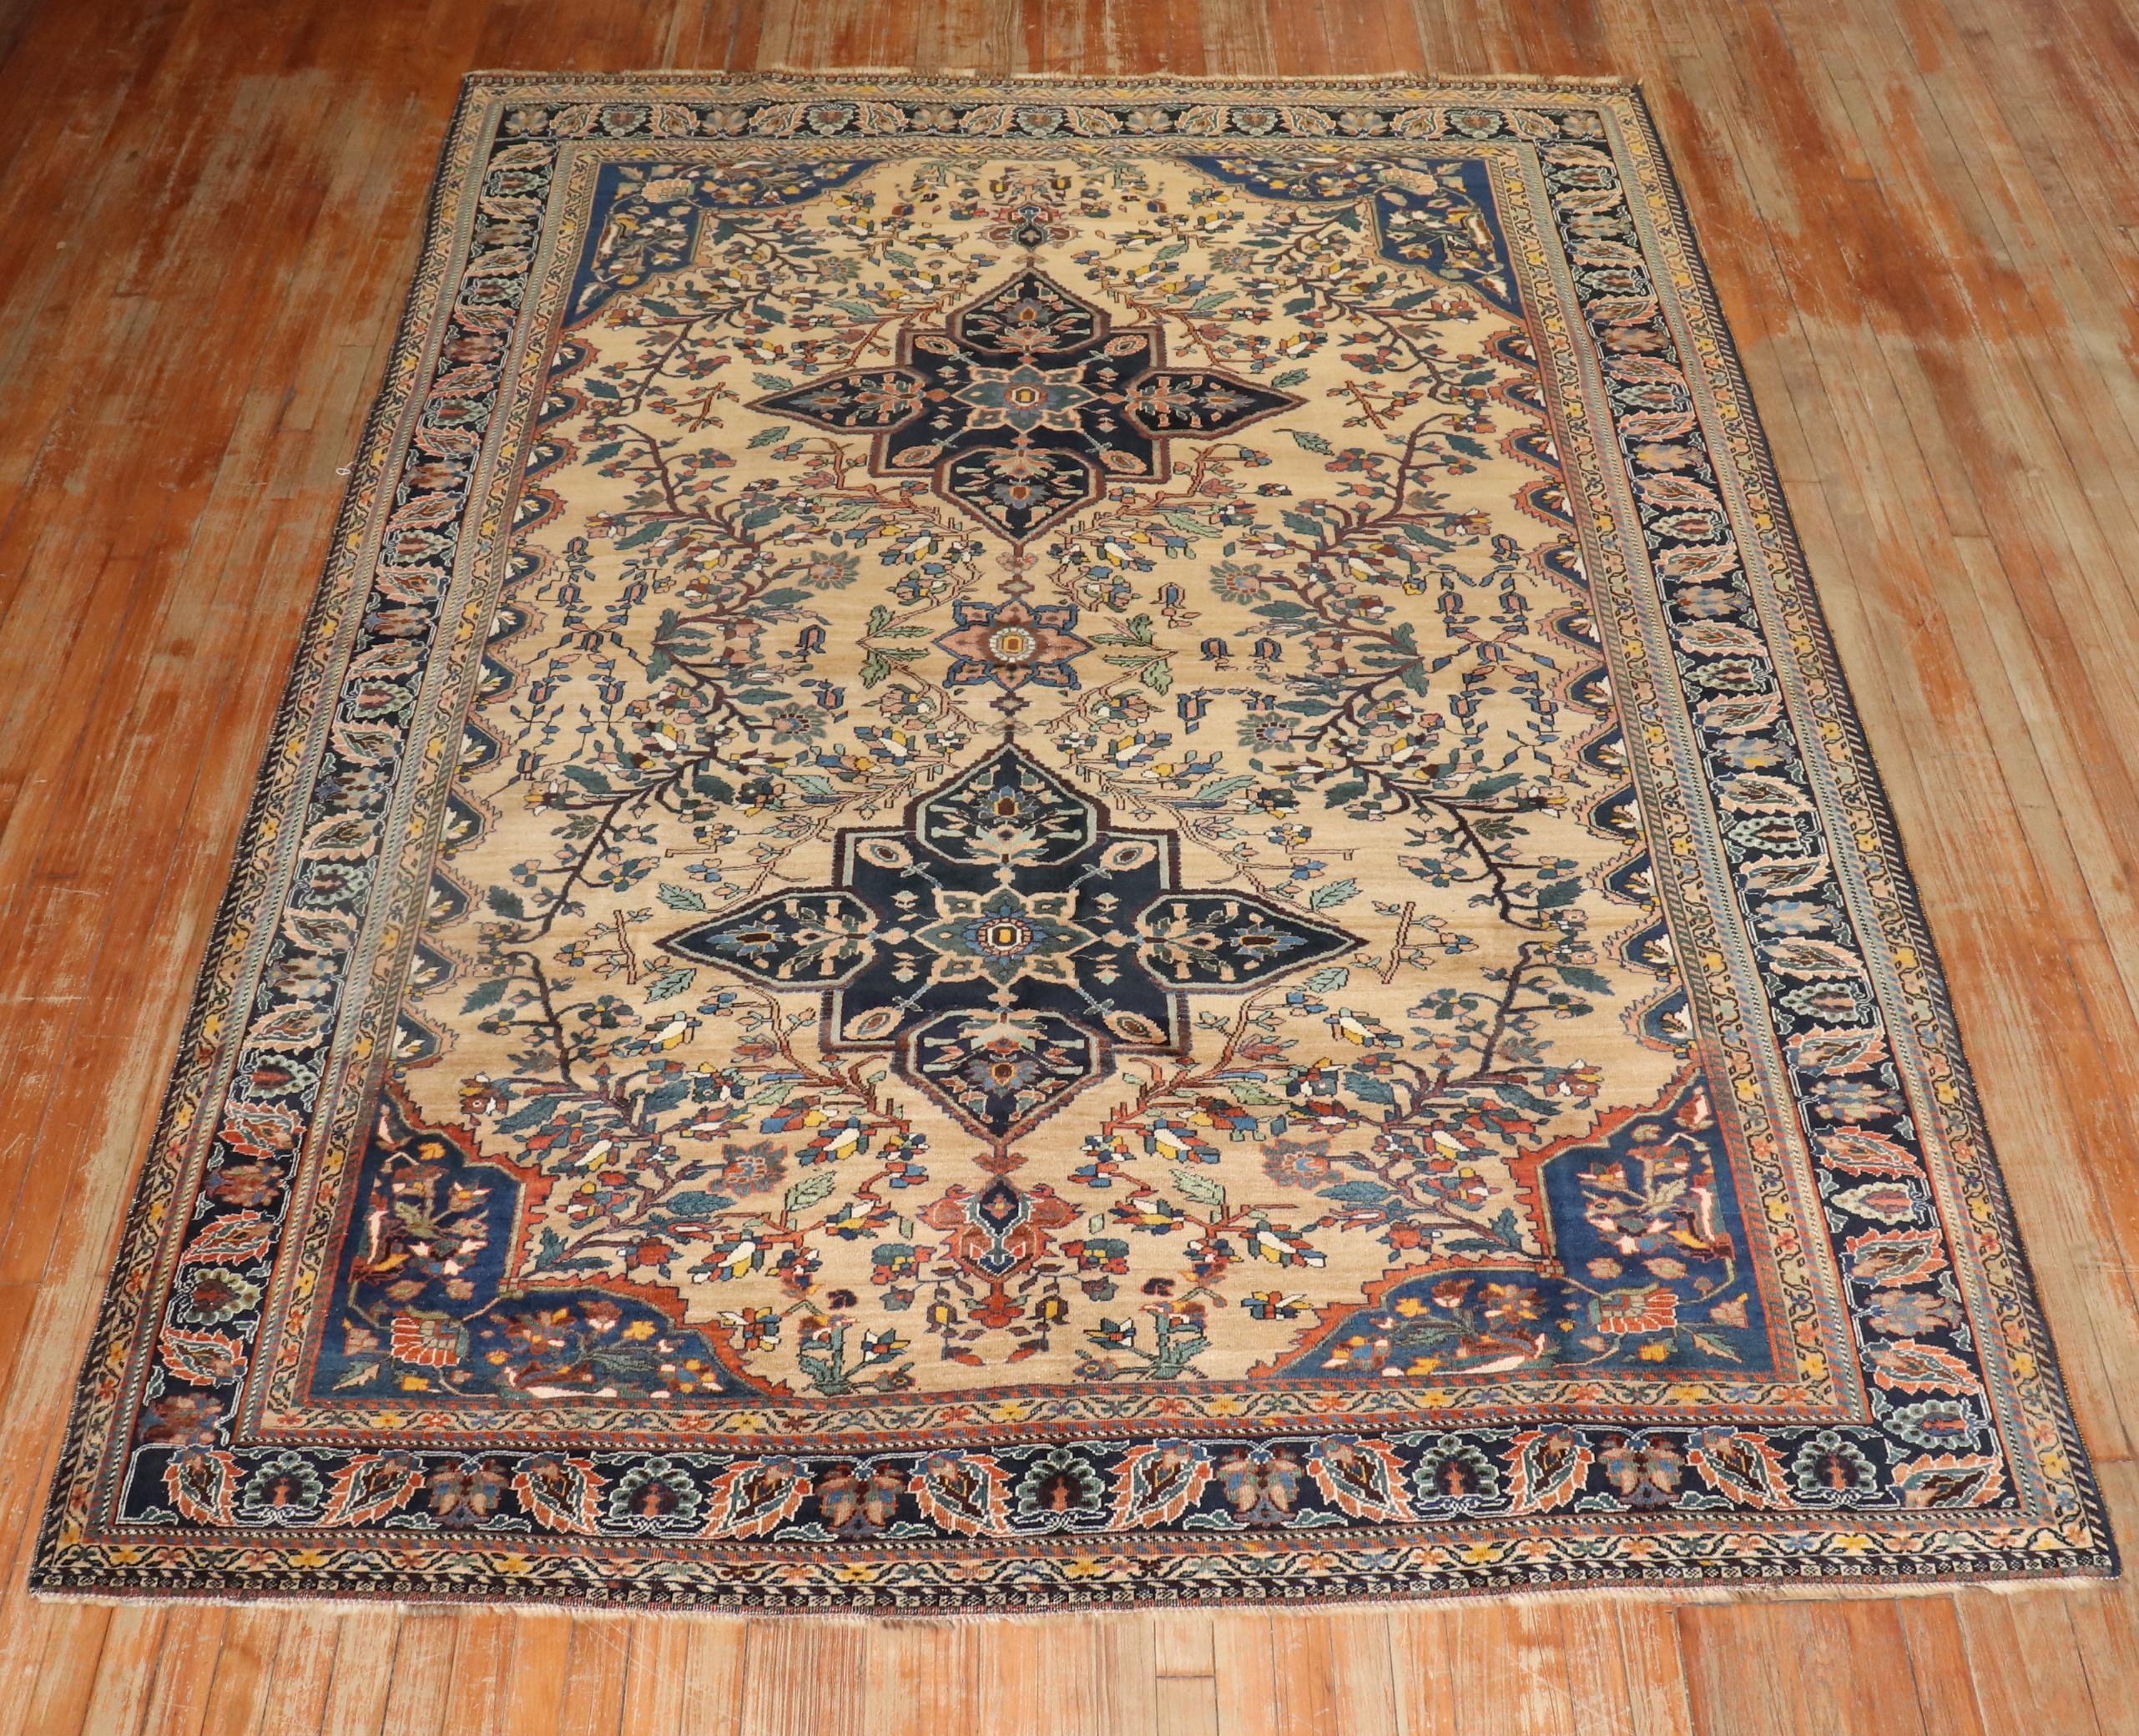 Zabihi Collection Early 20th Century Qashqai Rare Small Room Size Rug For Sale 4